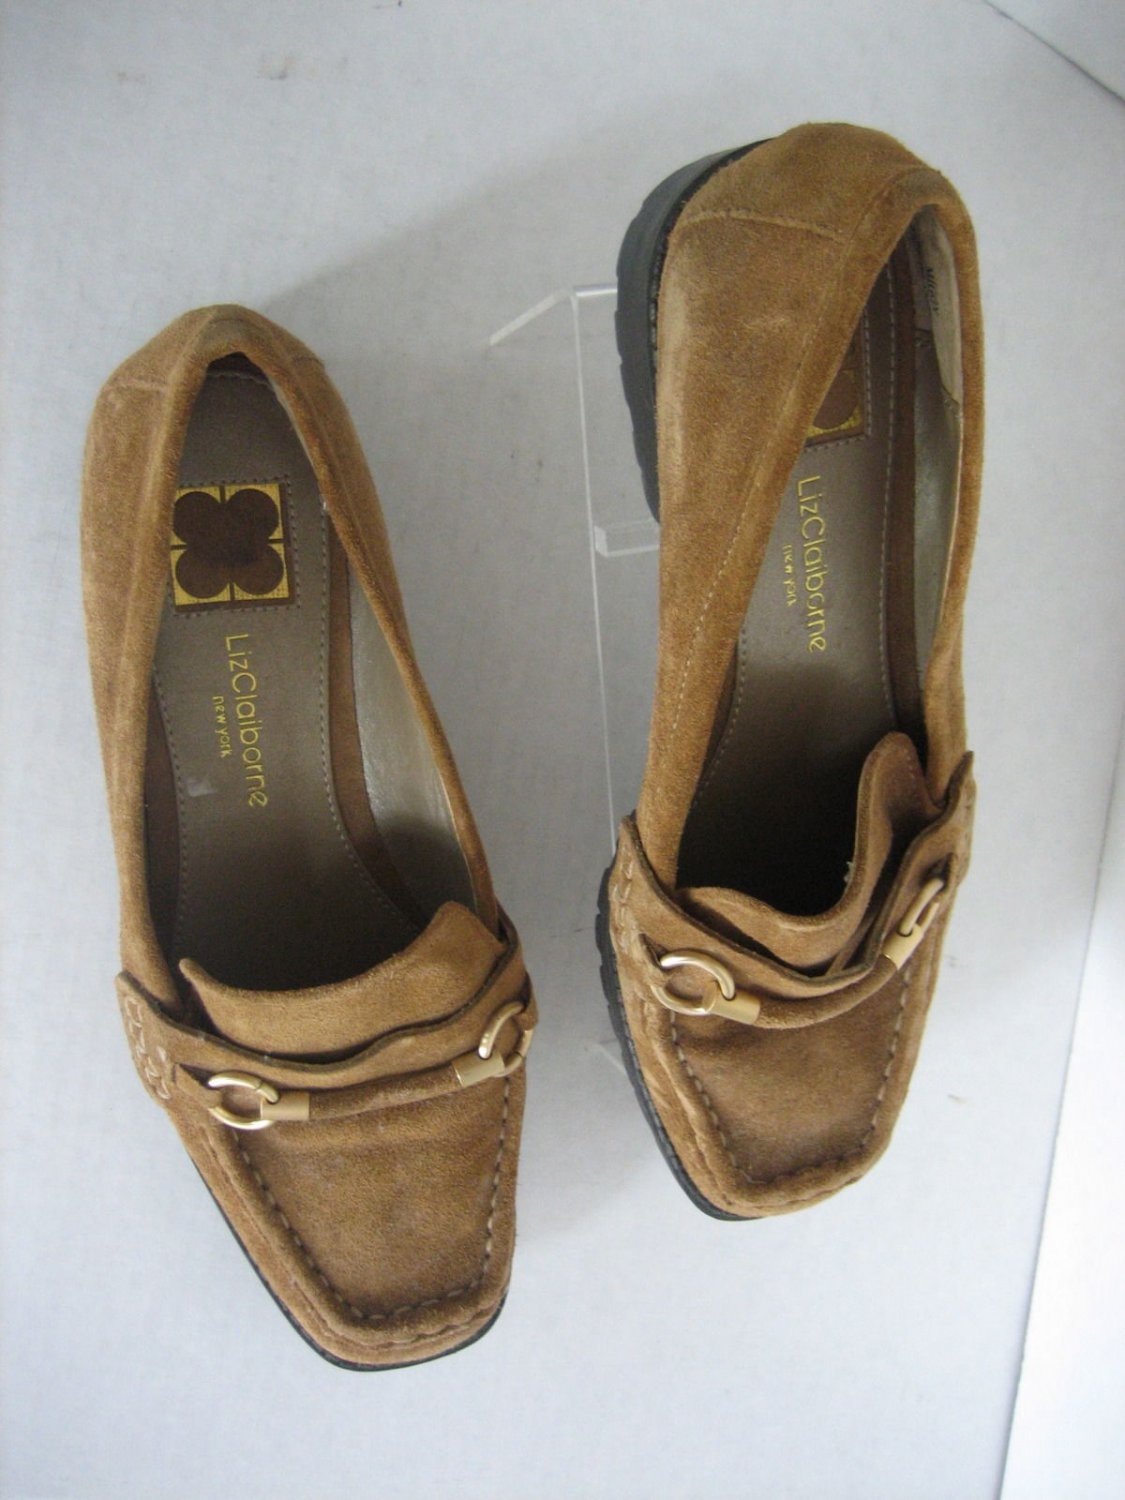 Liz Claiborne Miggy Tan Suede Loafer Style Low Heel Shoe Sz 8 Pre-Owned